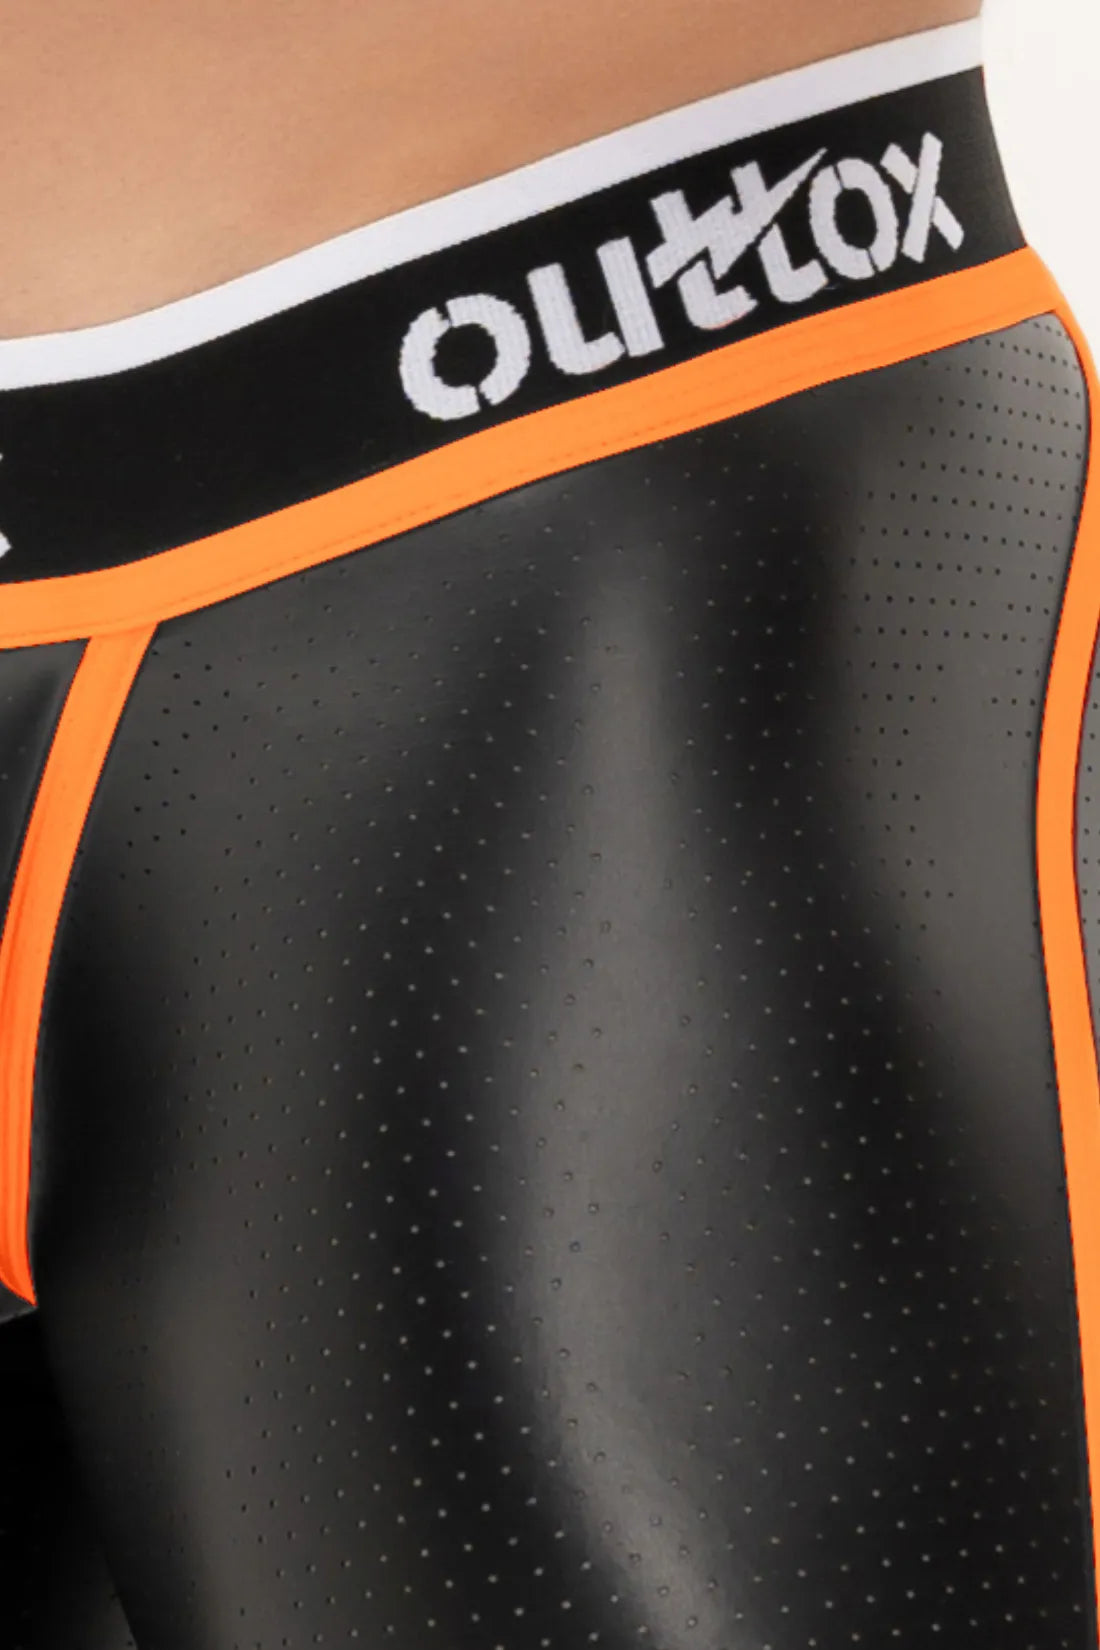 Outtox. Zip-Rear Leggings with Snap Codpiece. Black and Orange